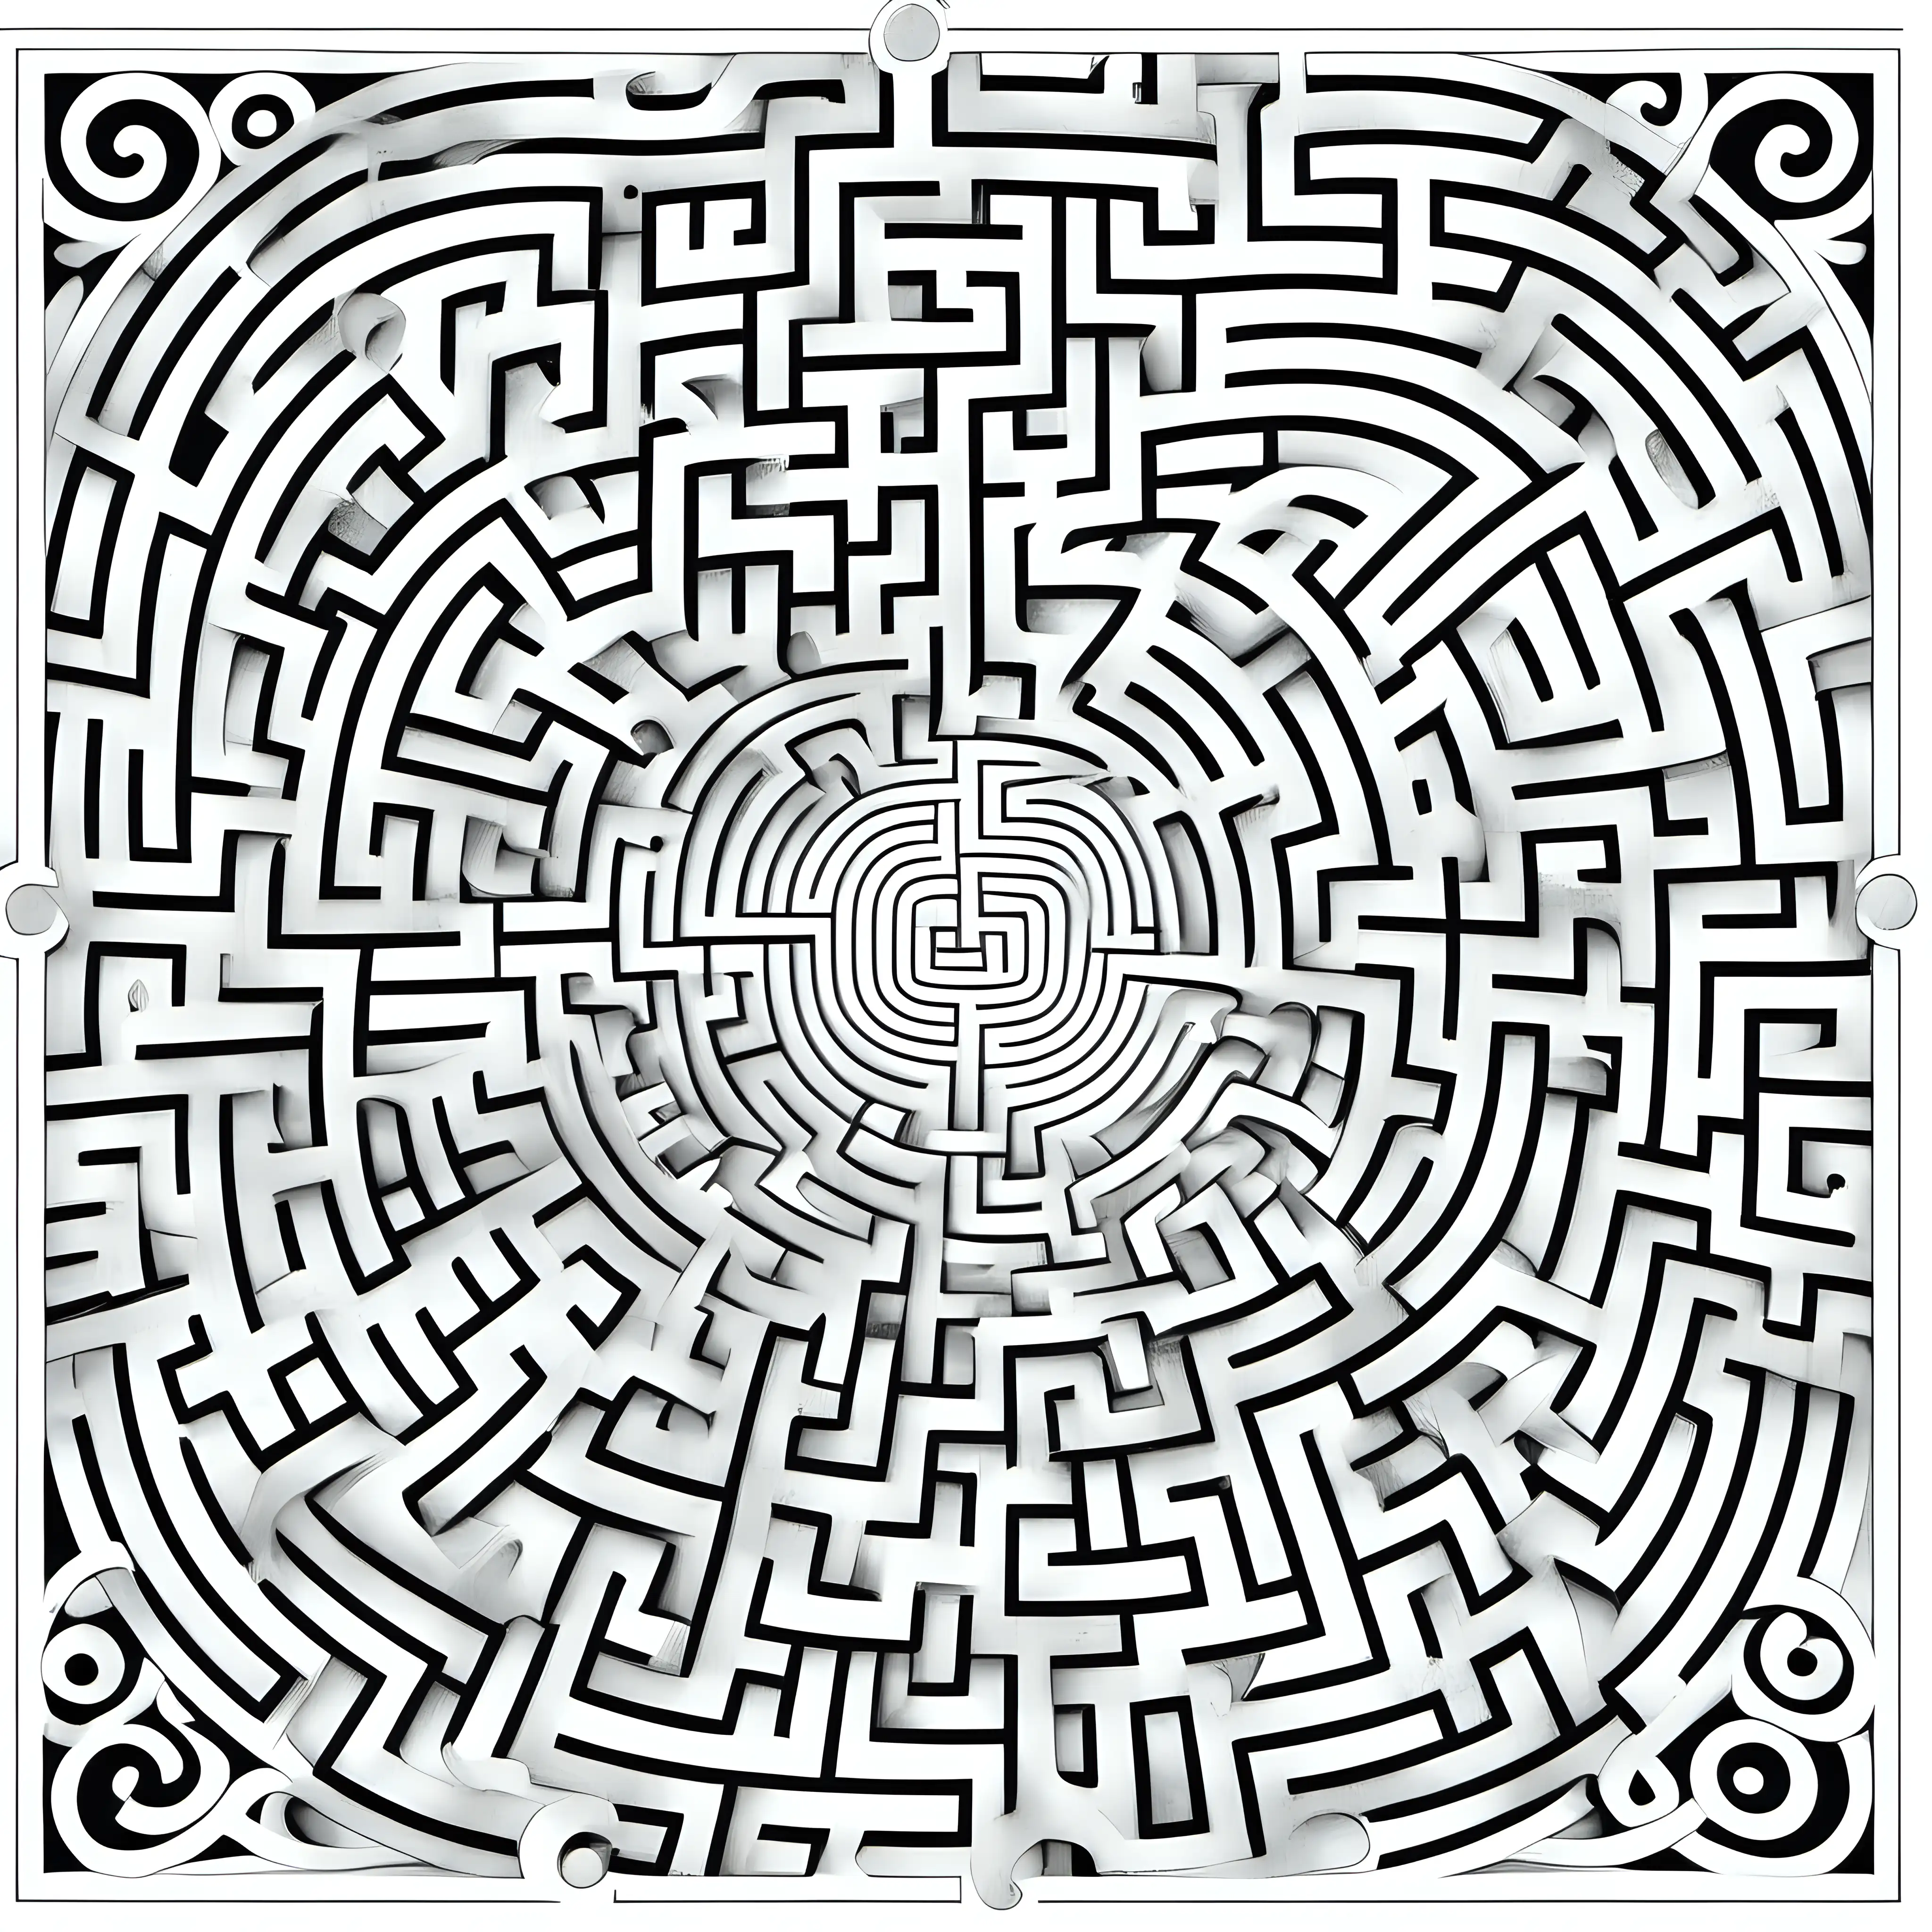 coloring book pages of complex mazes only black and white, mostly white
 again 20 times with variation in each
